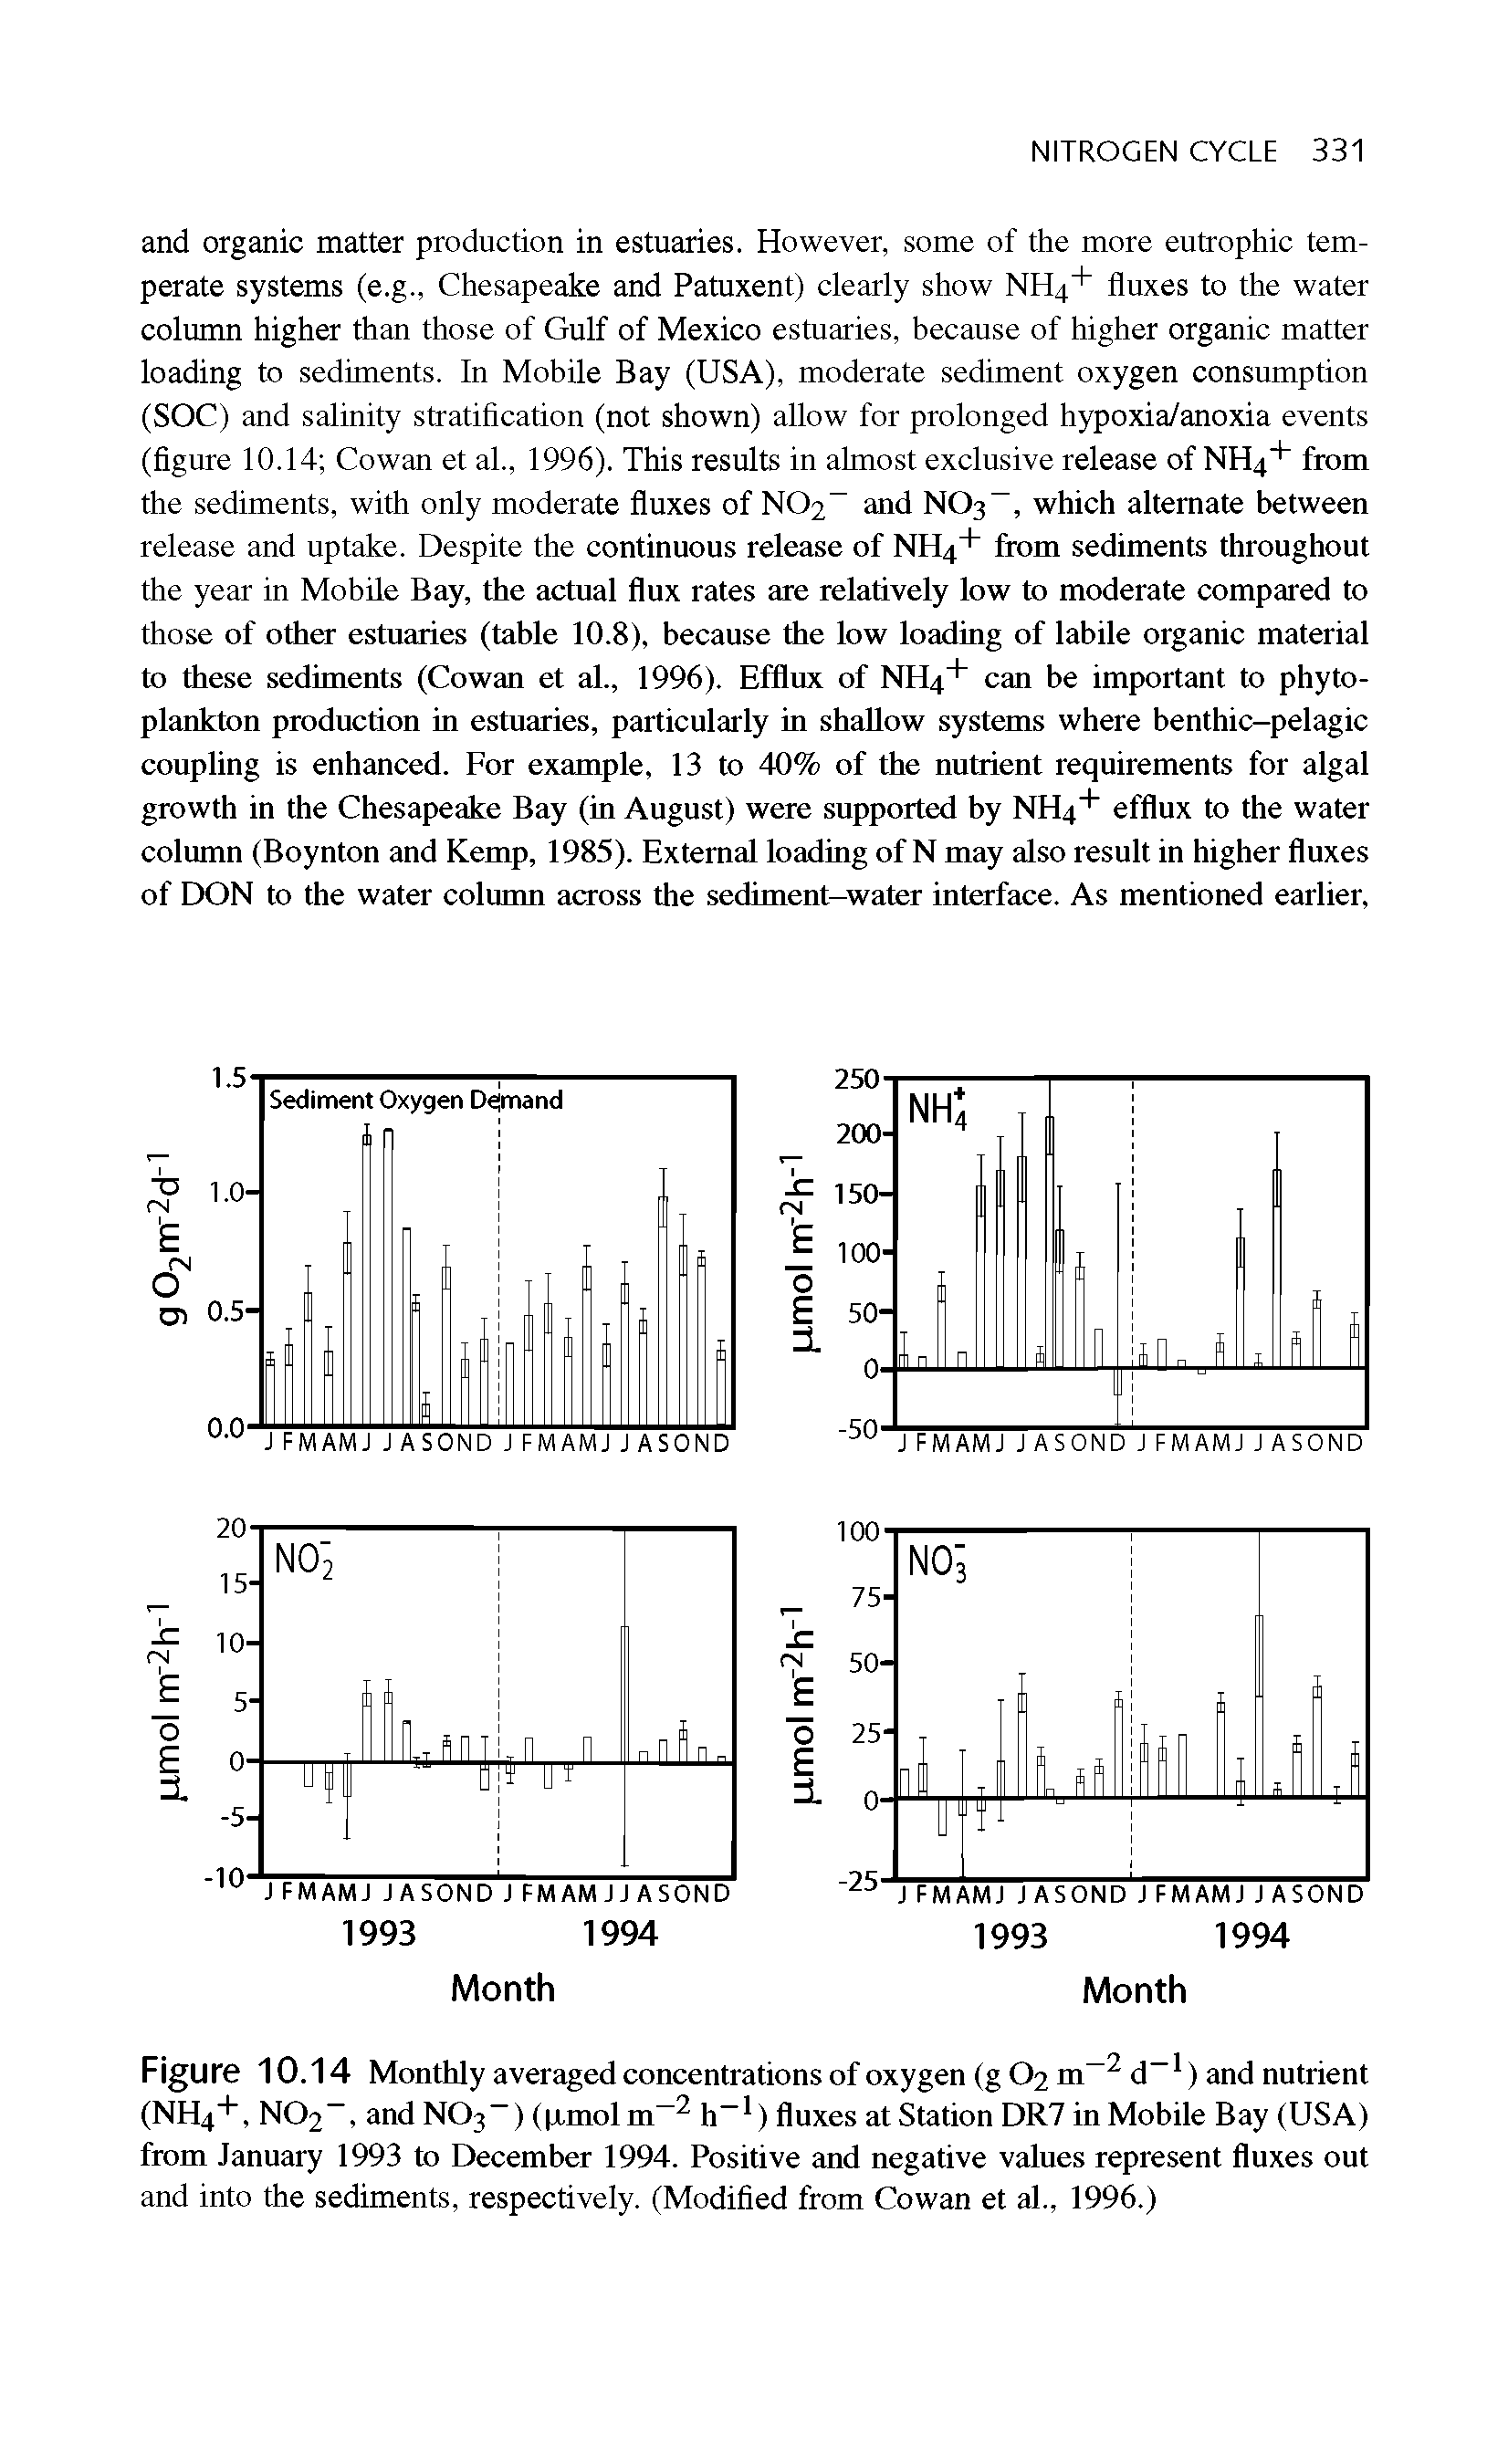 Figure 10.14 Monthly averaged concentrations of oxygen (g O2 m-2 d 1) and nutrient (NH4+, N02 , and NO3 ) (ixmolm-2 h-1) fluxes at Station DR7 in Mobile Bay (USA) from January 1993 to December 1994. Positive and negative values represent fluxes out and into the sediments, respectively. (Modified from Cowan et al., 1996.)...